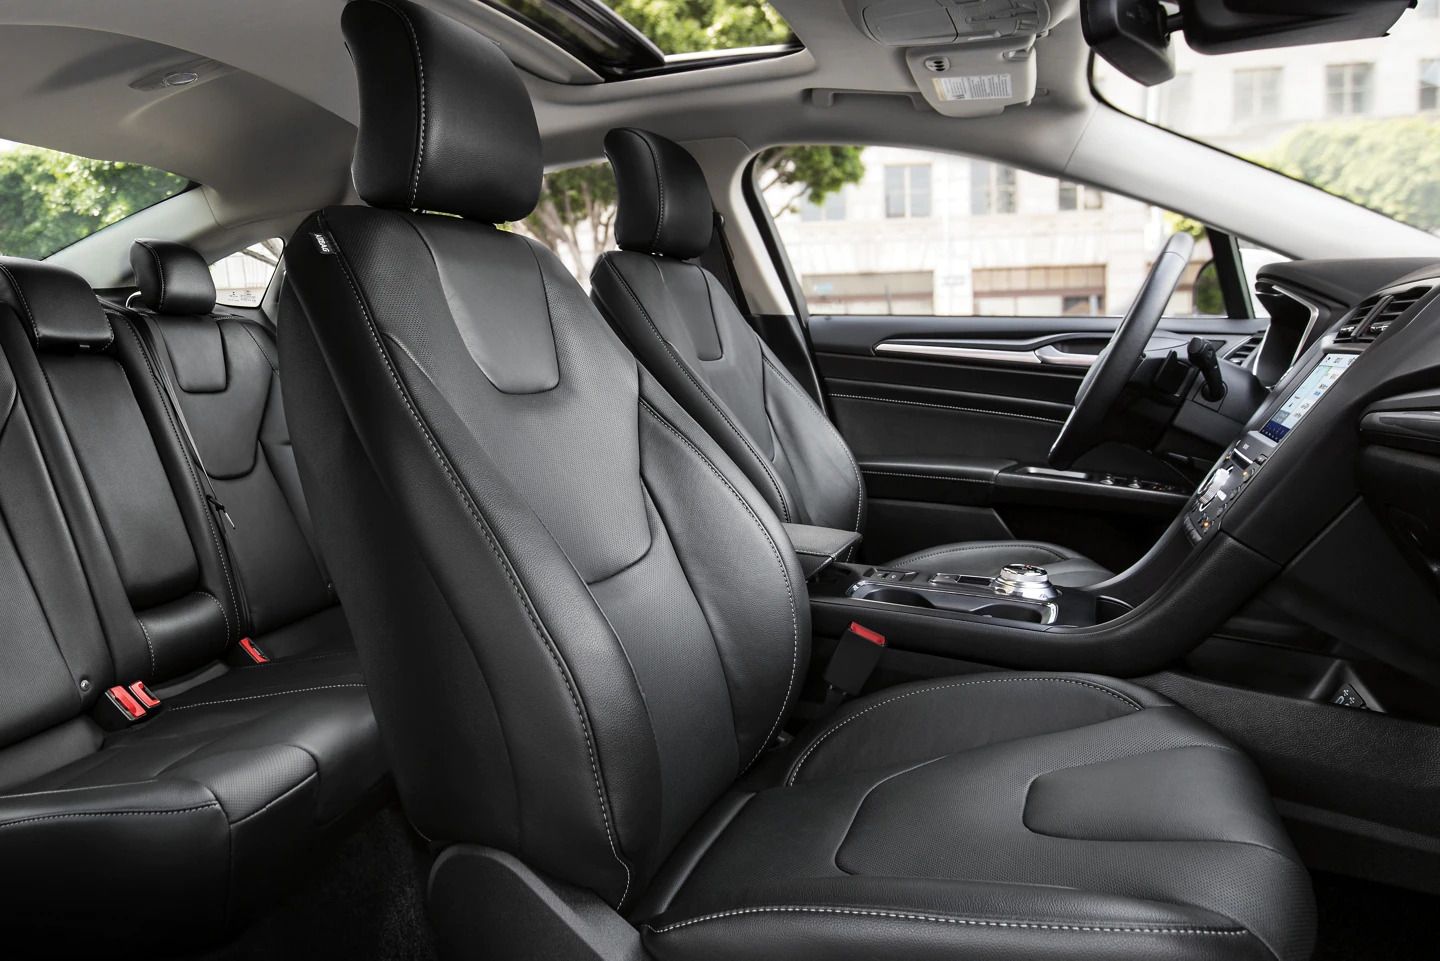 2020 Ford Fusion Seats